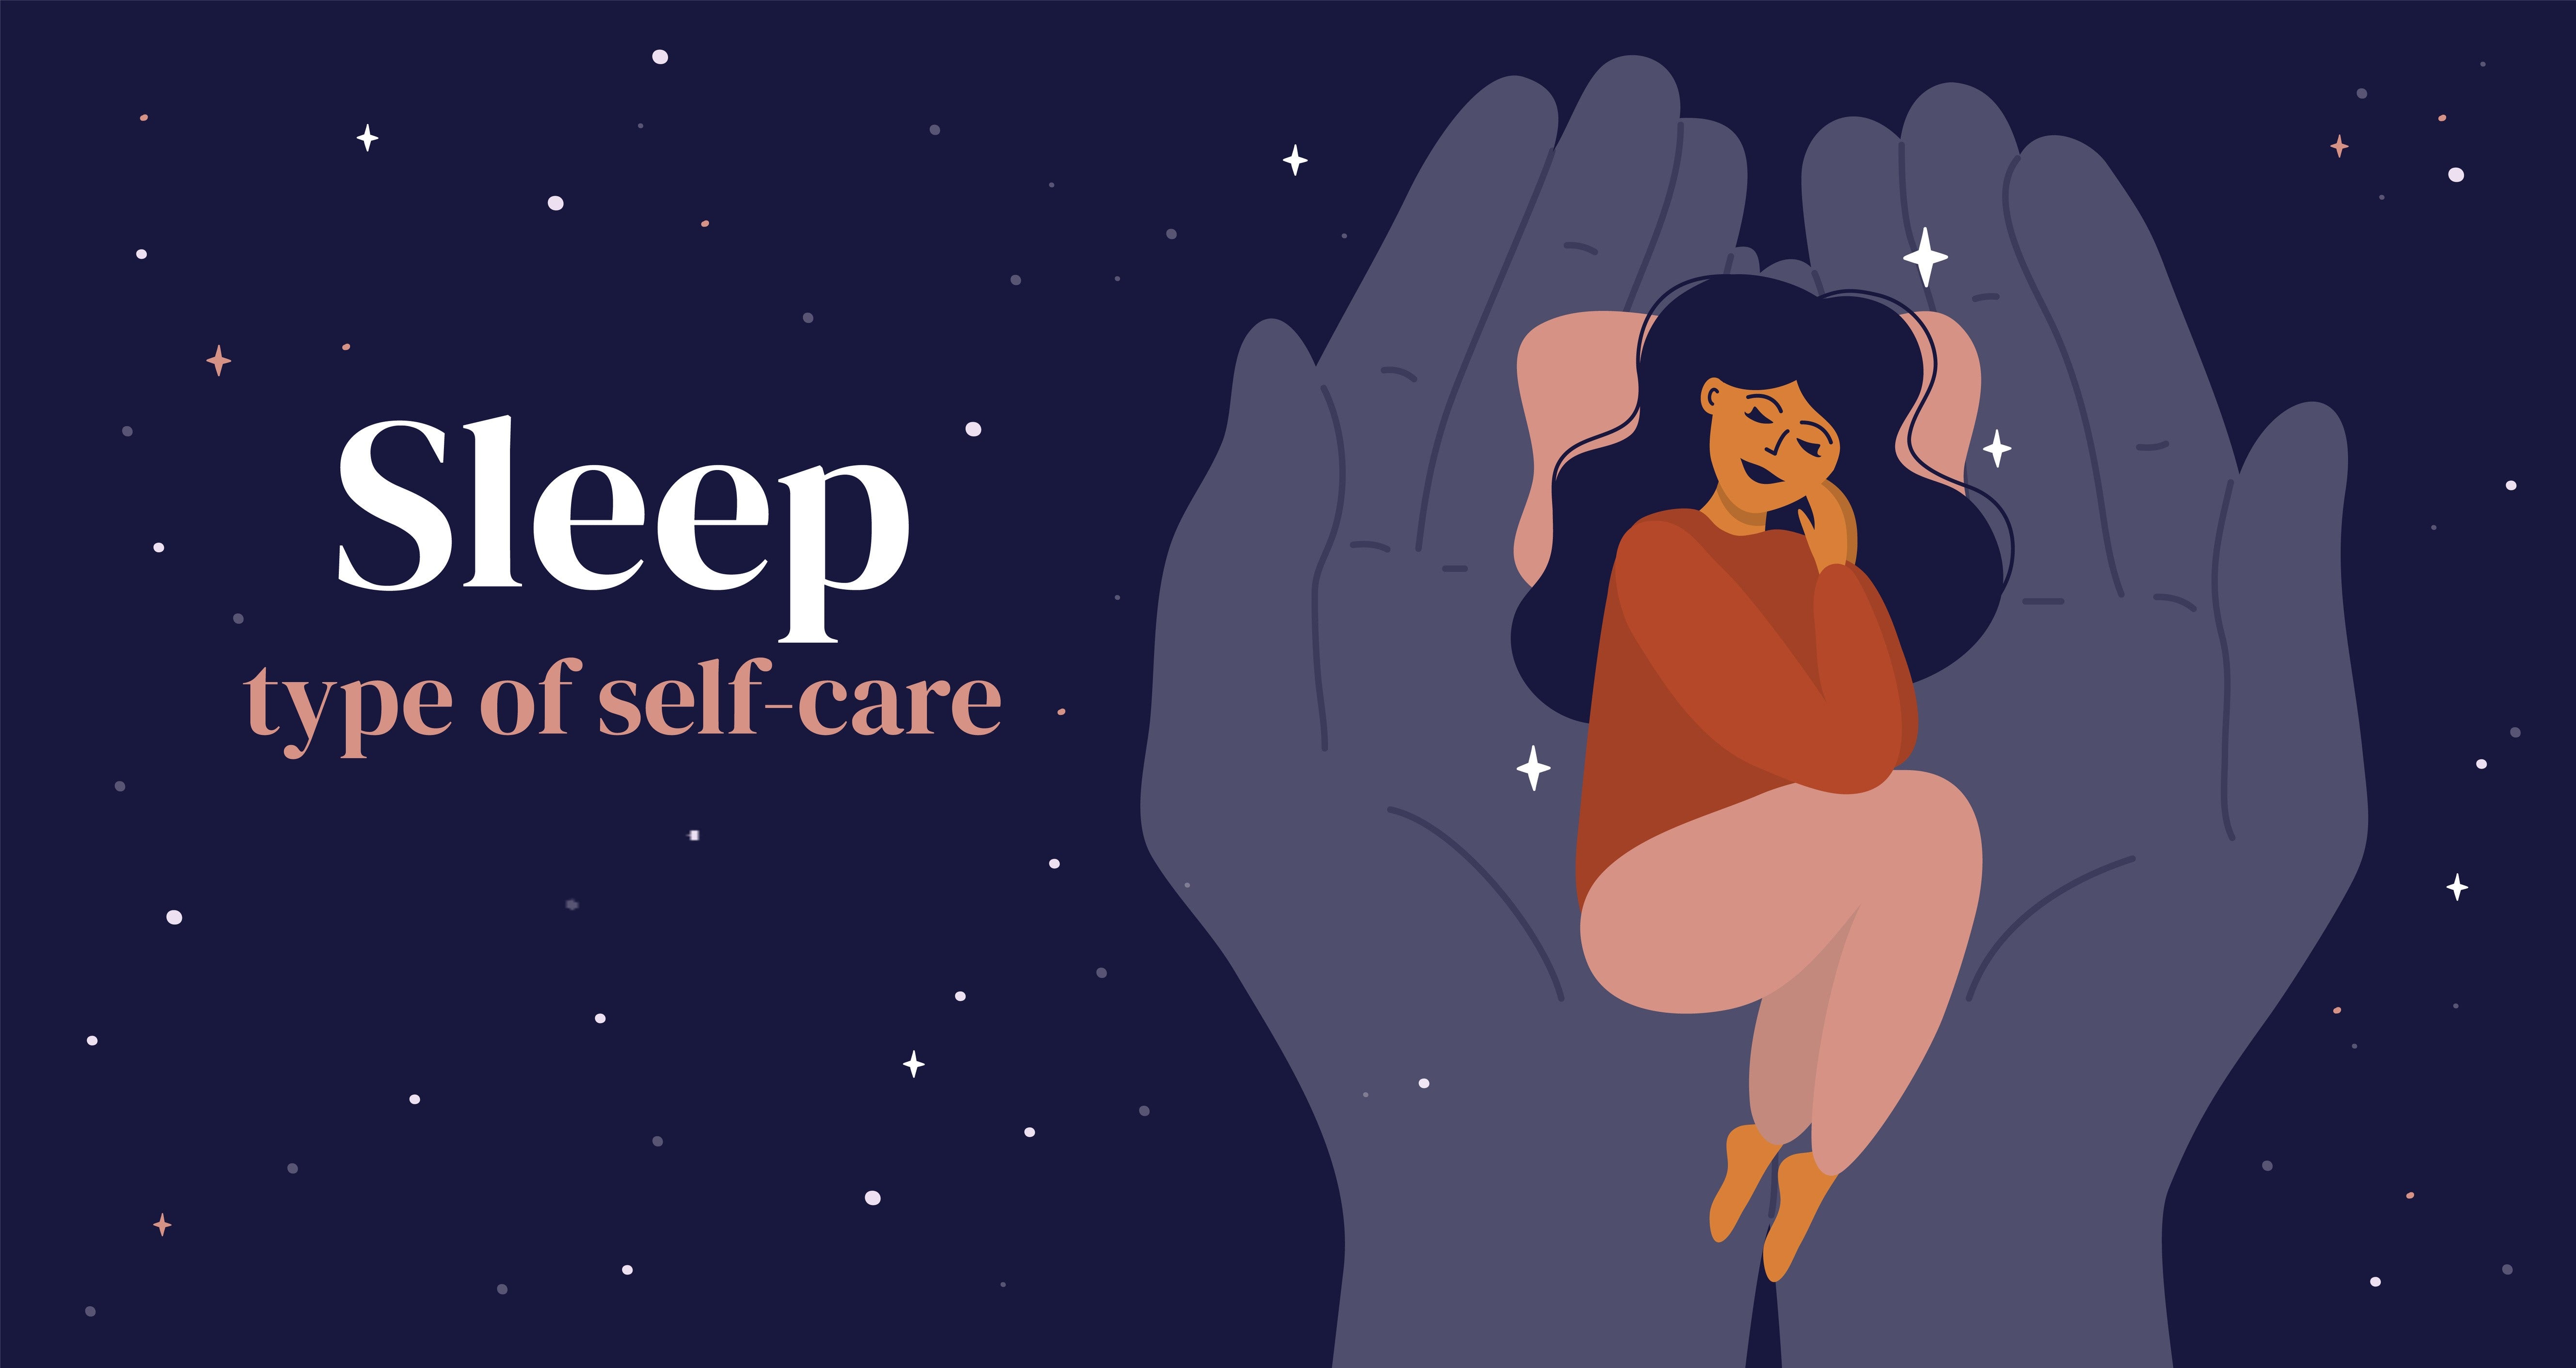 What's Your Beauty Sleep Number? Calculate How Much Shut-Eye You Really Need